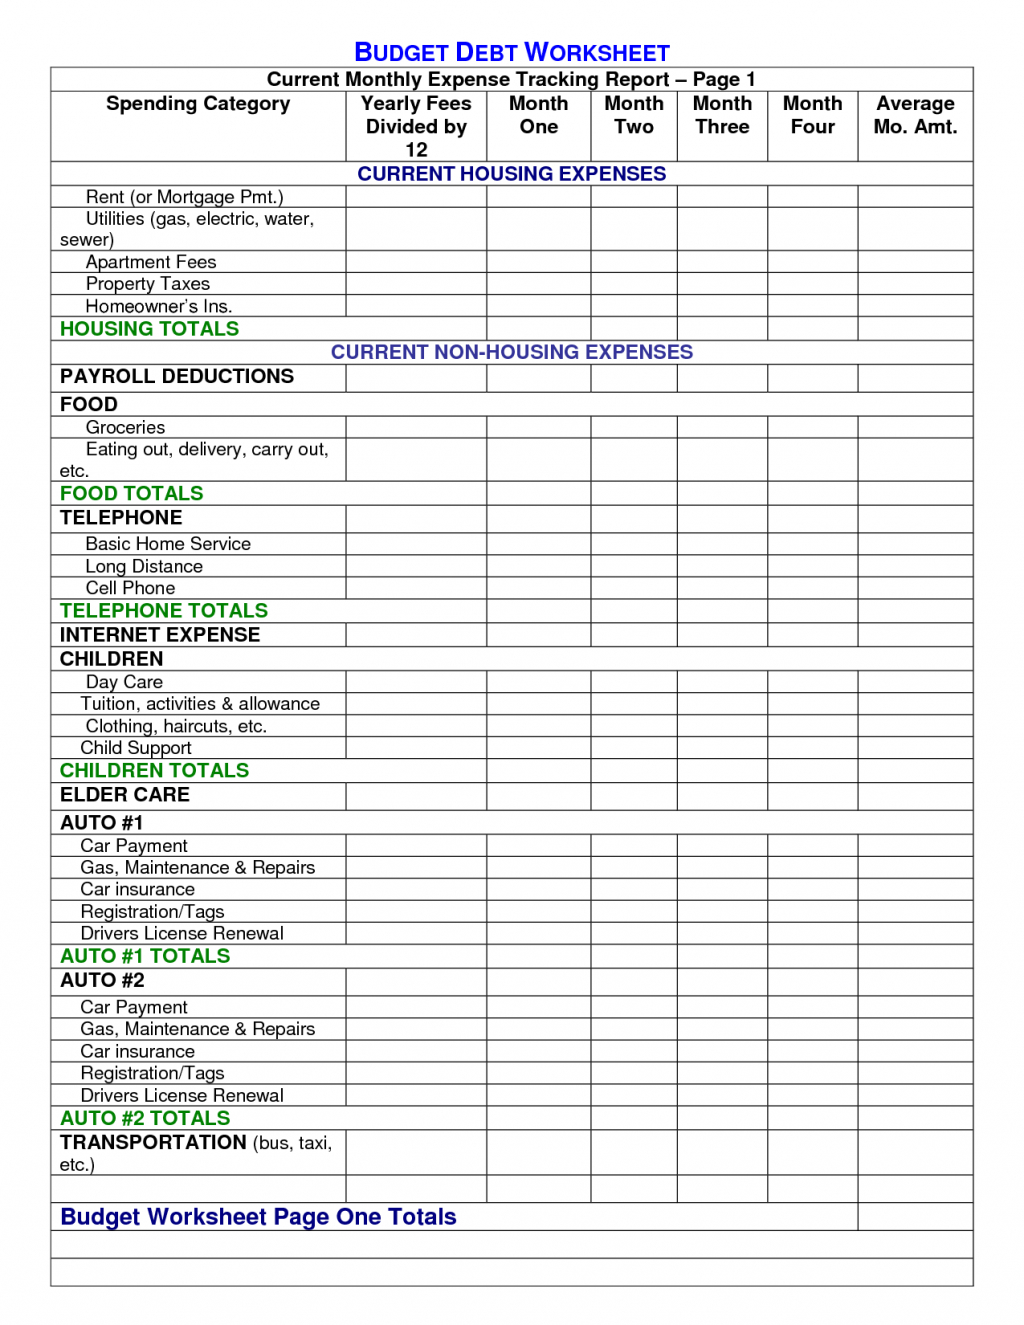 Budget And Debt Spreadsheet In Example Of Get Out Debt Budget Spreadsheet Worksheet Download Them